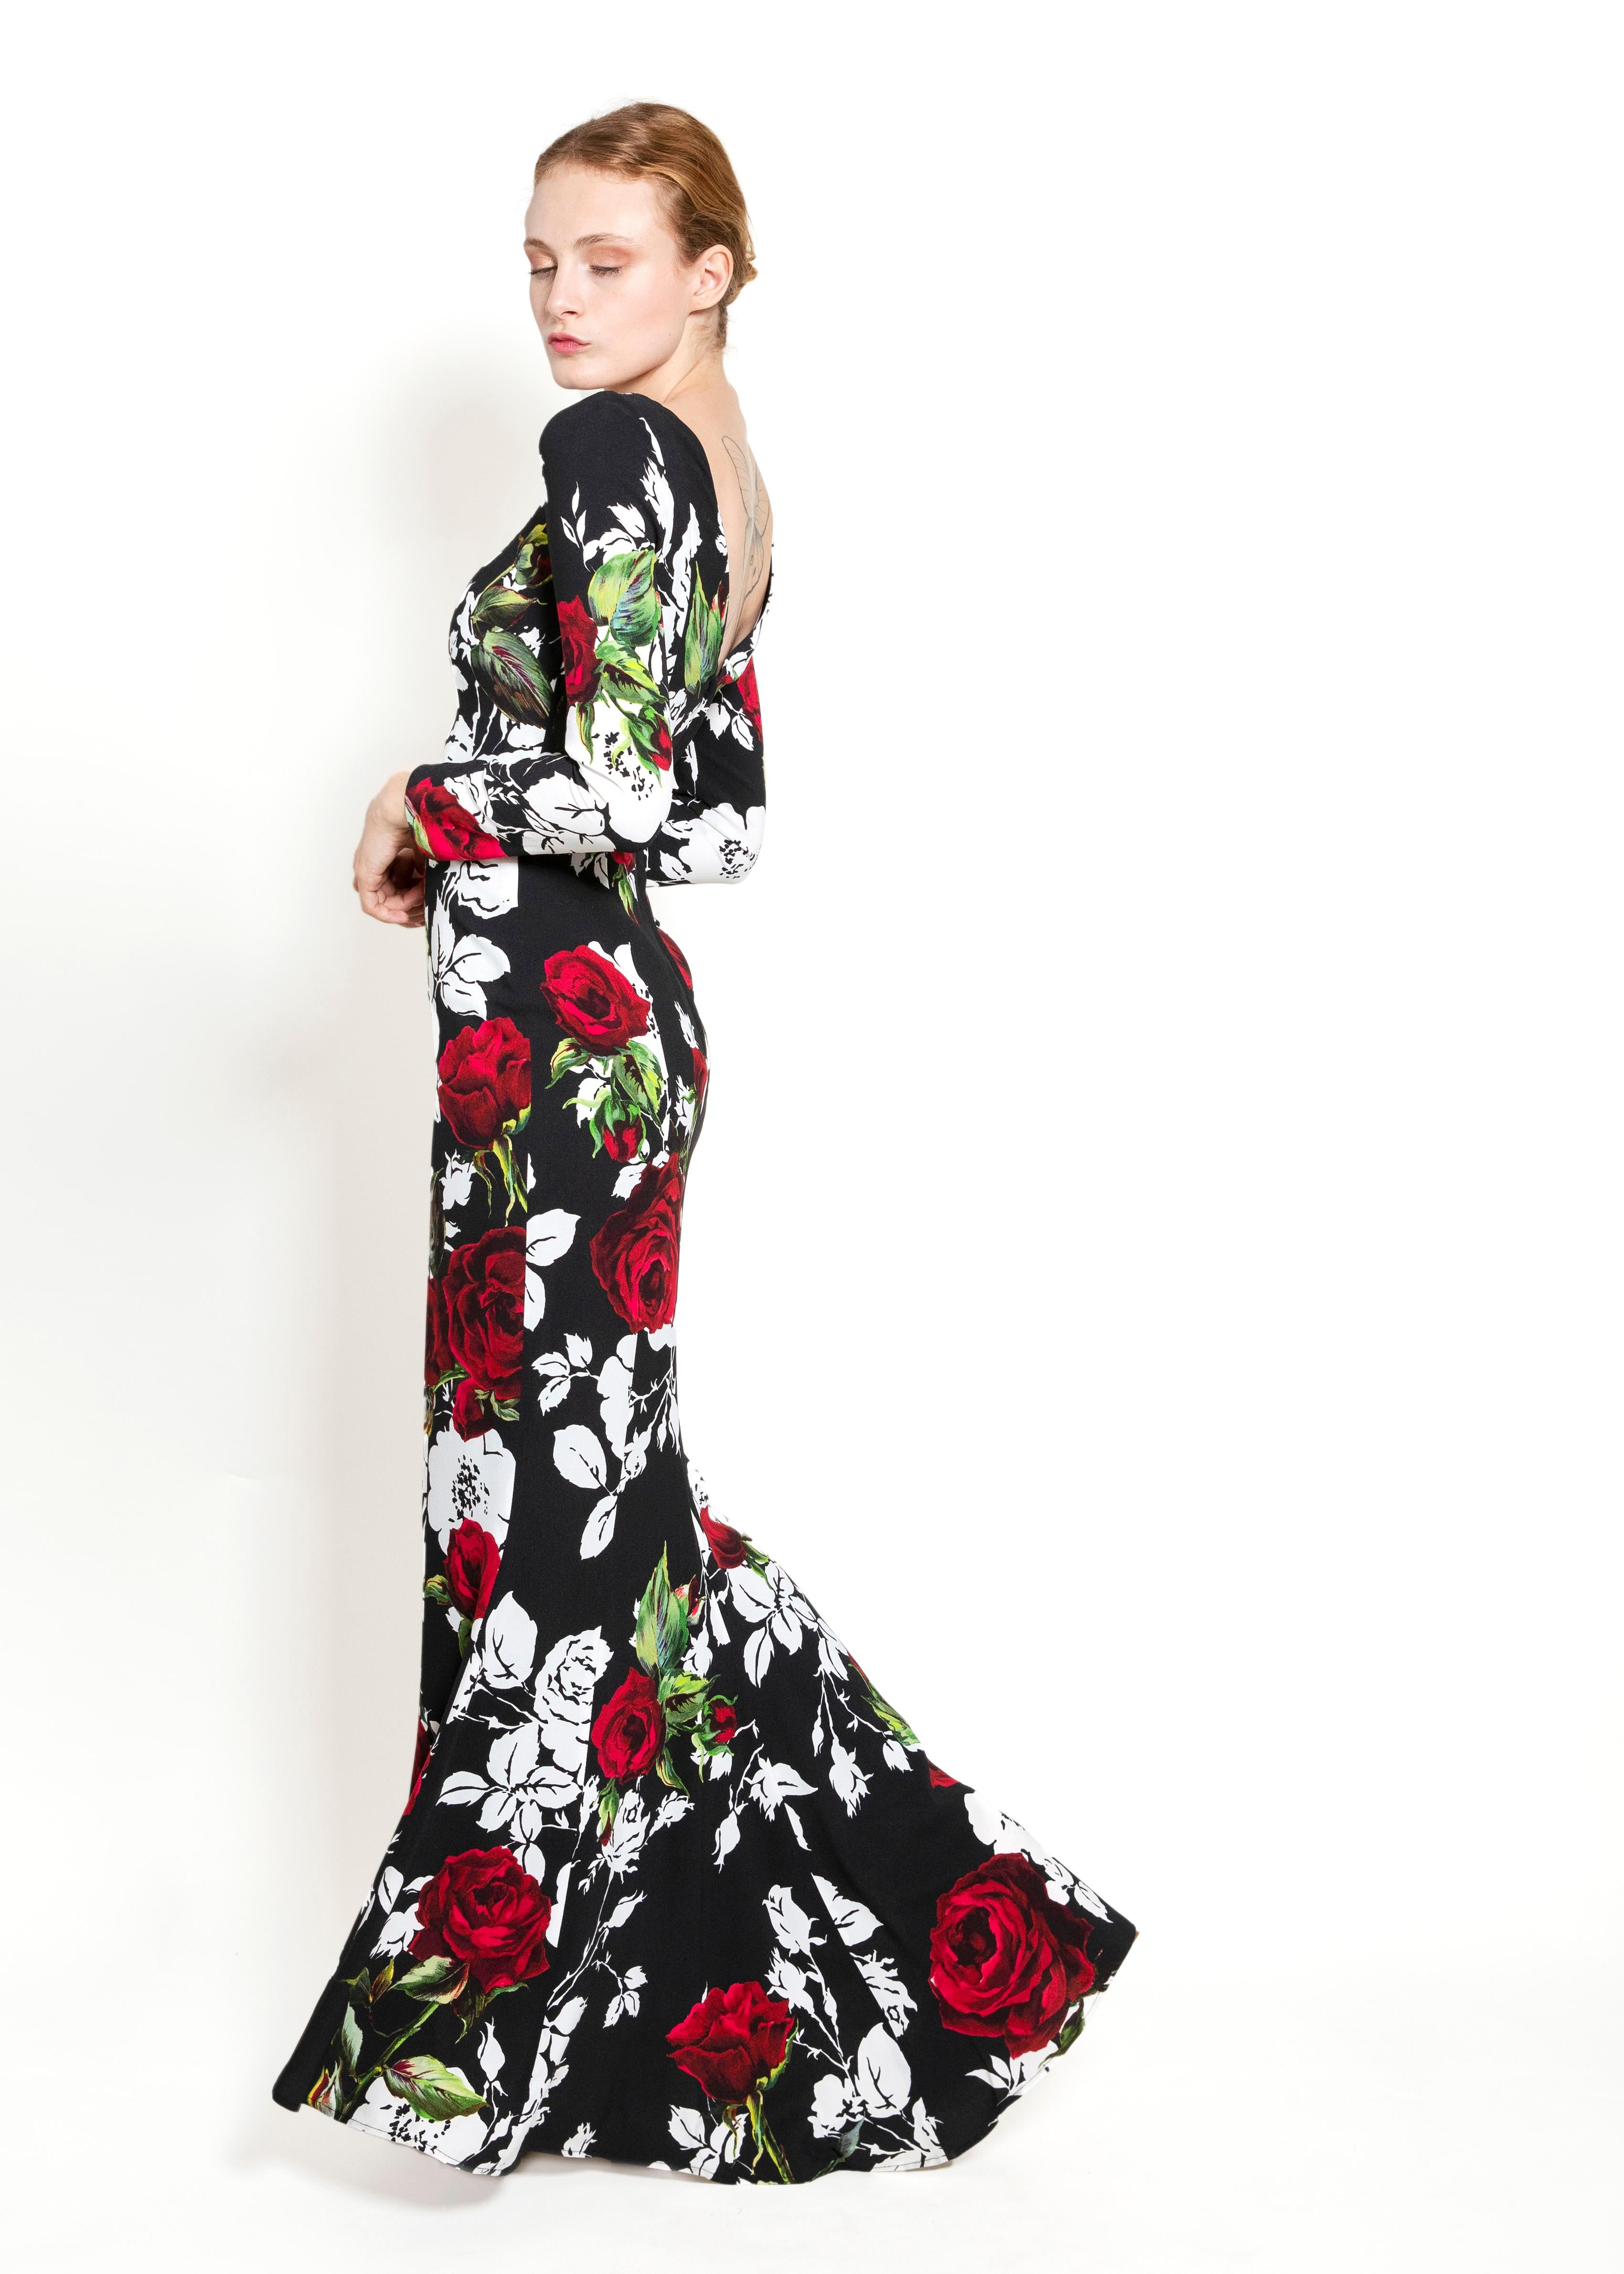 Dolce & Gabbana Fall 2015 L/S Floral Dress In Excellent Condition For Sale In Los Angeles, CA